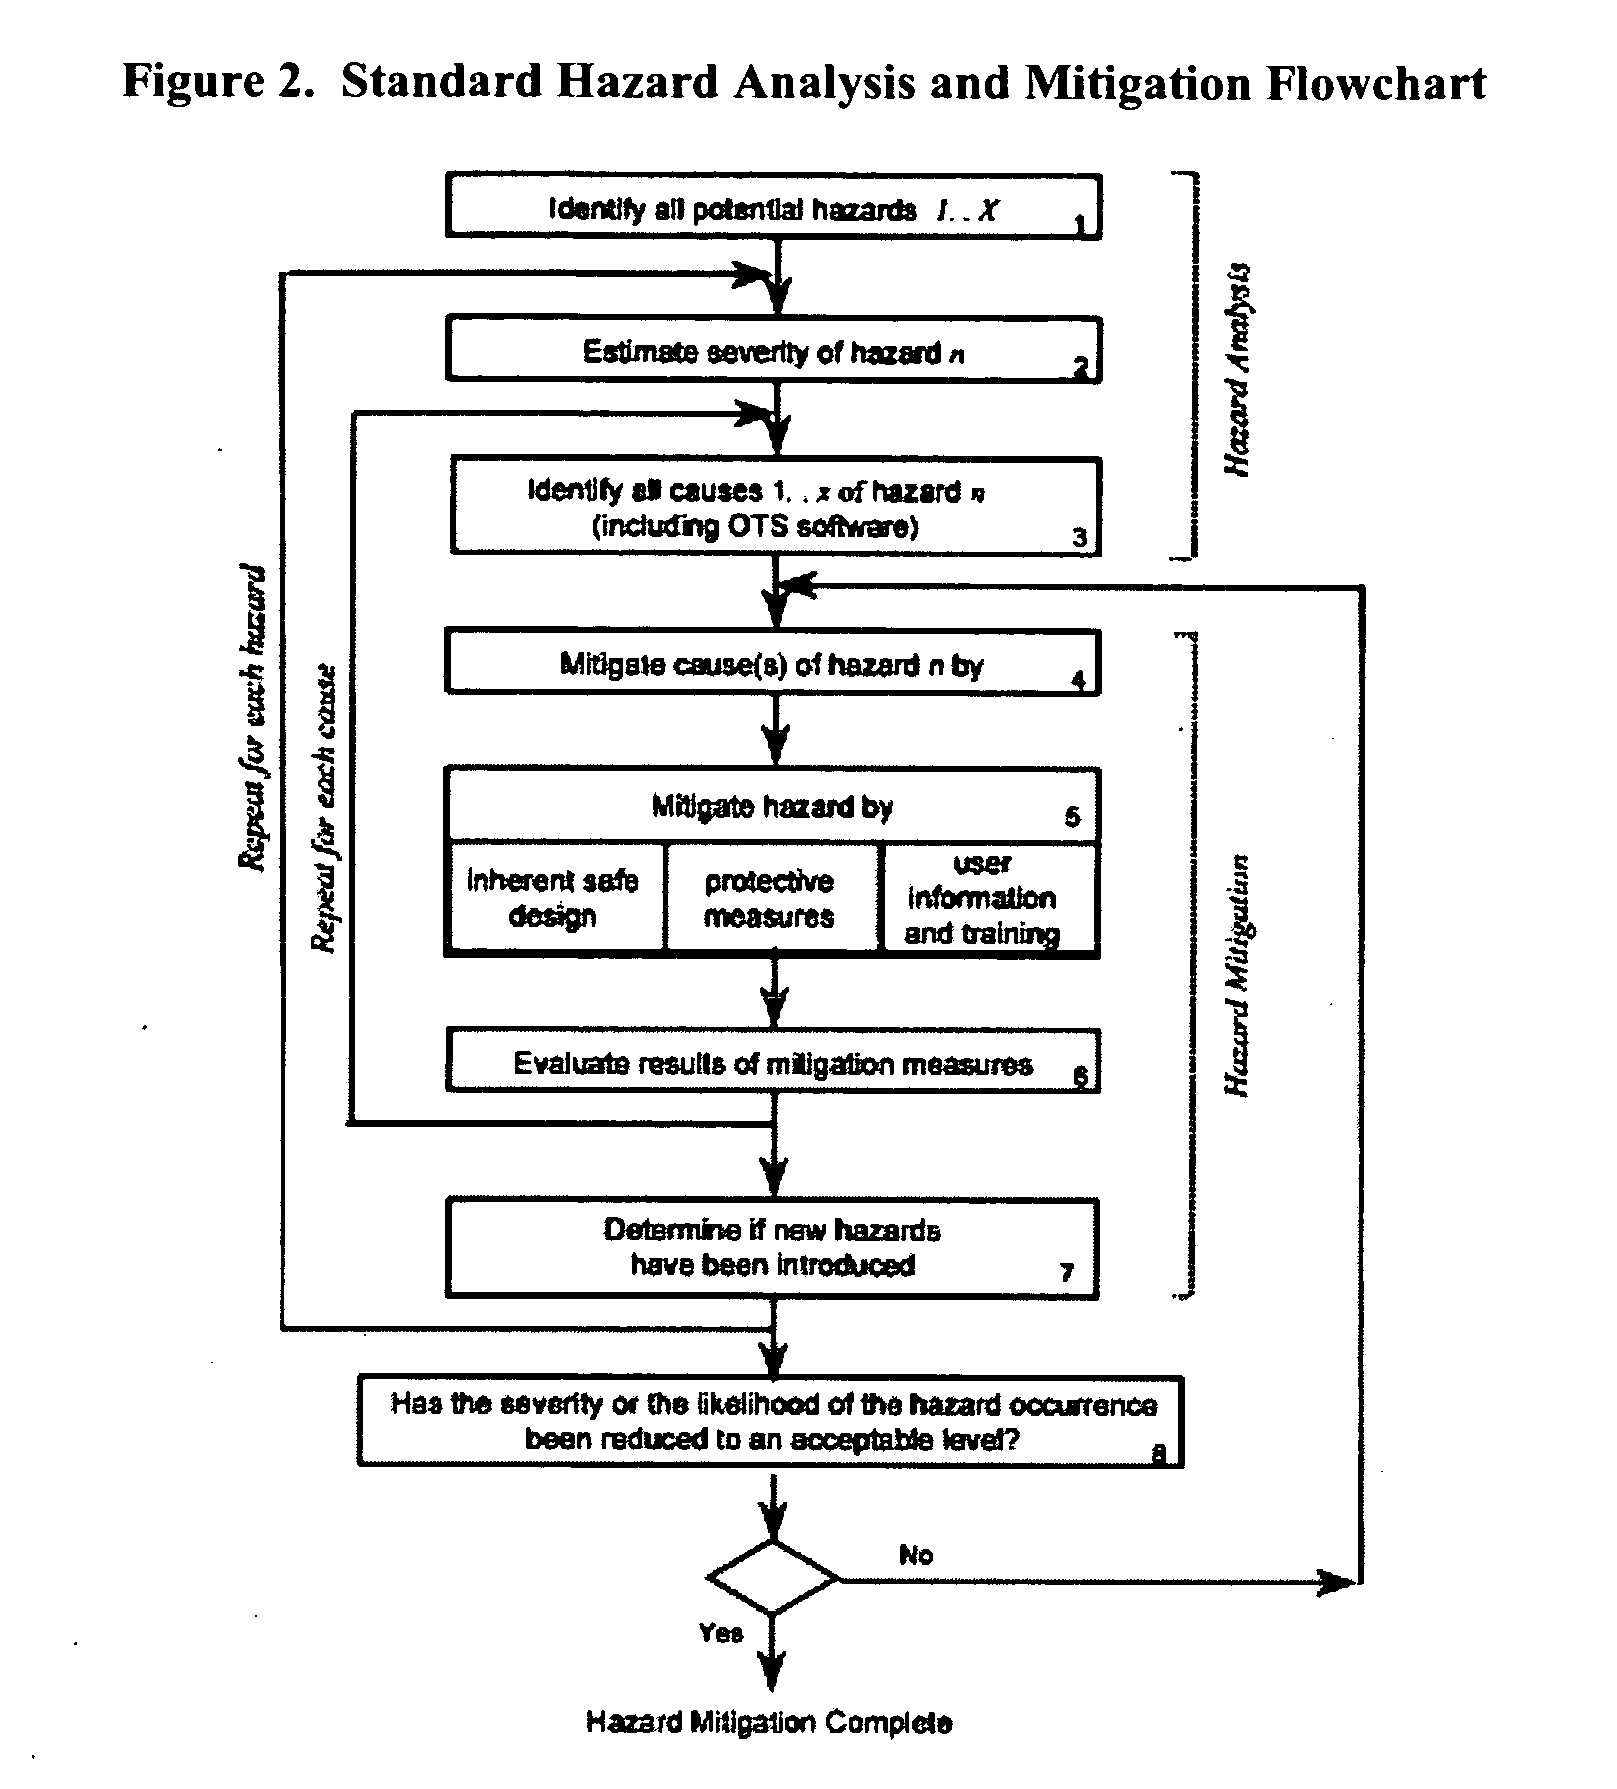 Manufacturing execution system for validation, quality and risk assessment and monitoring of pharmaceutical manufacturing processes